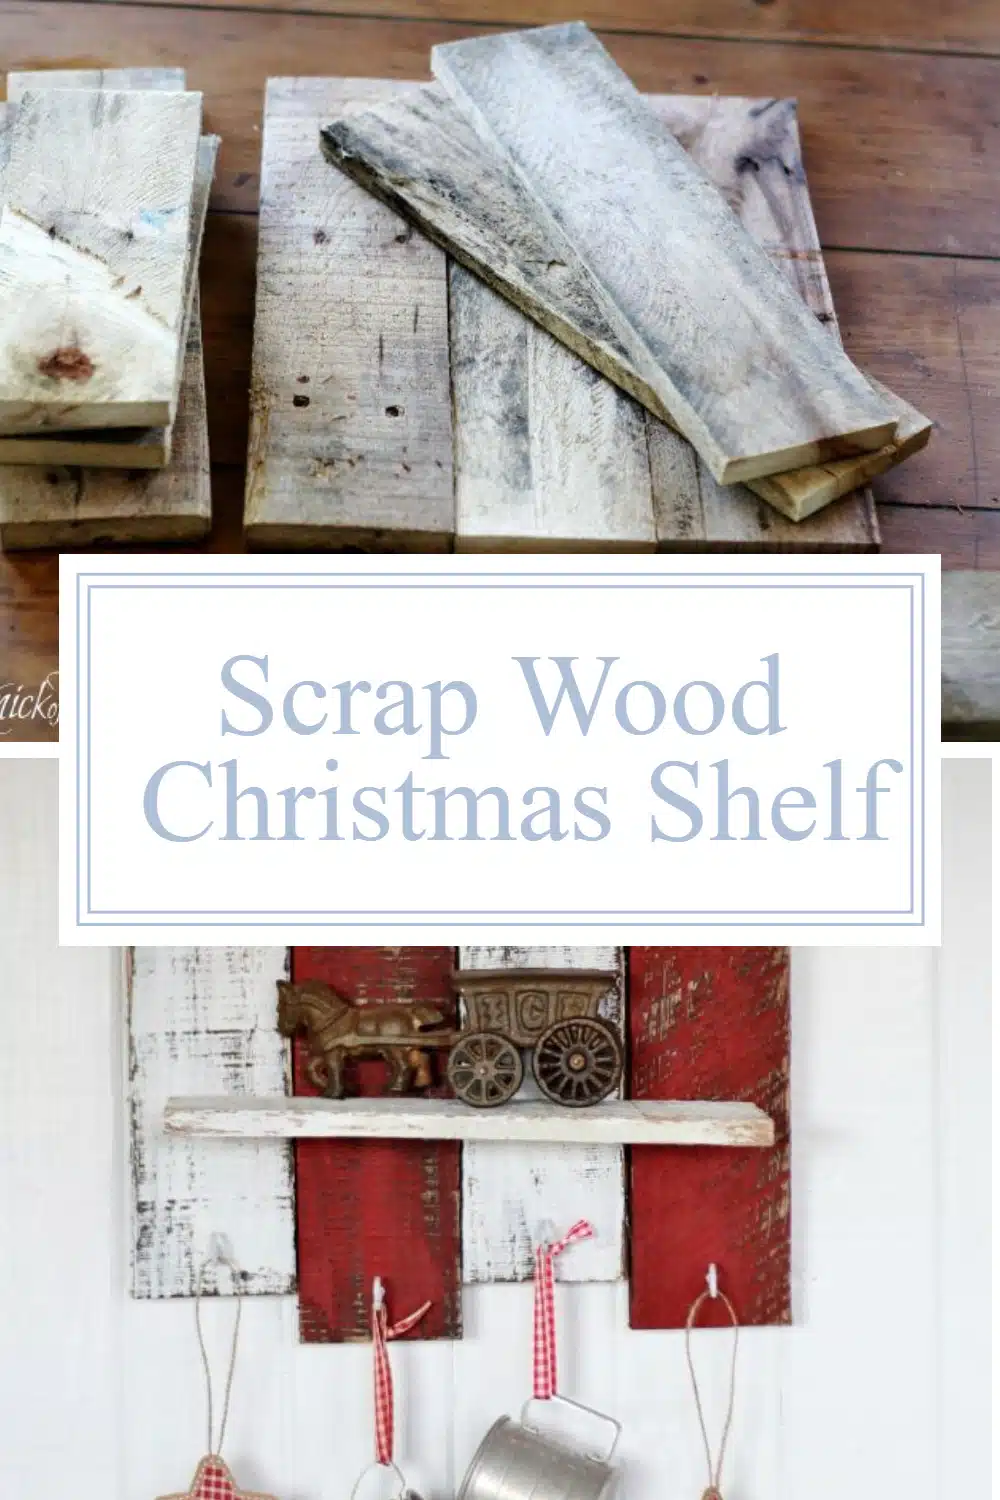 How to make a scrap wood Christmas shelf out of pallet boards. This small piece is perfect for hanging stockings or towels, etc. #MyRepurposedLife #NickofTime #pallet #christmas via @repurposedlife